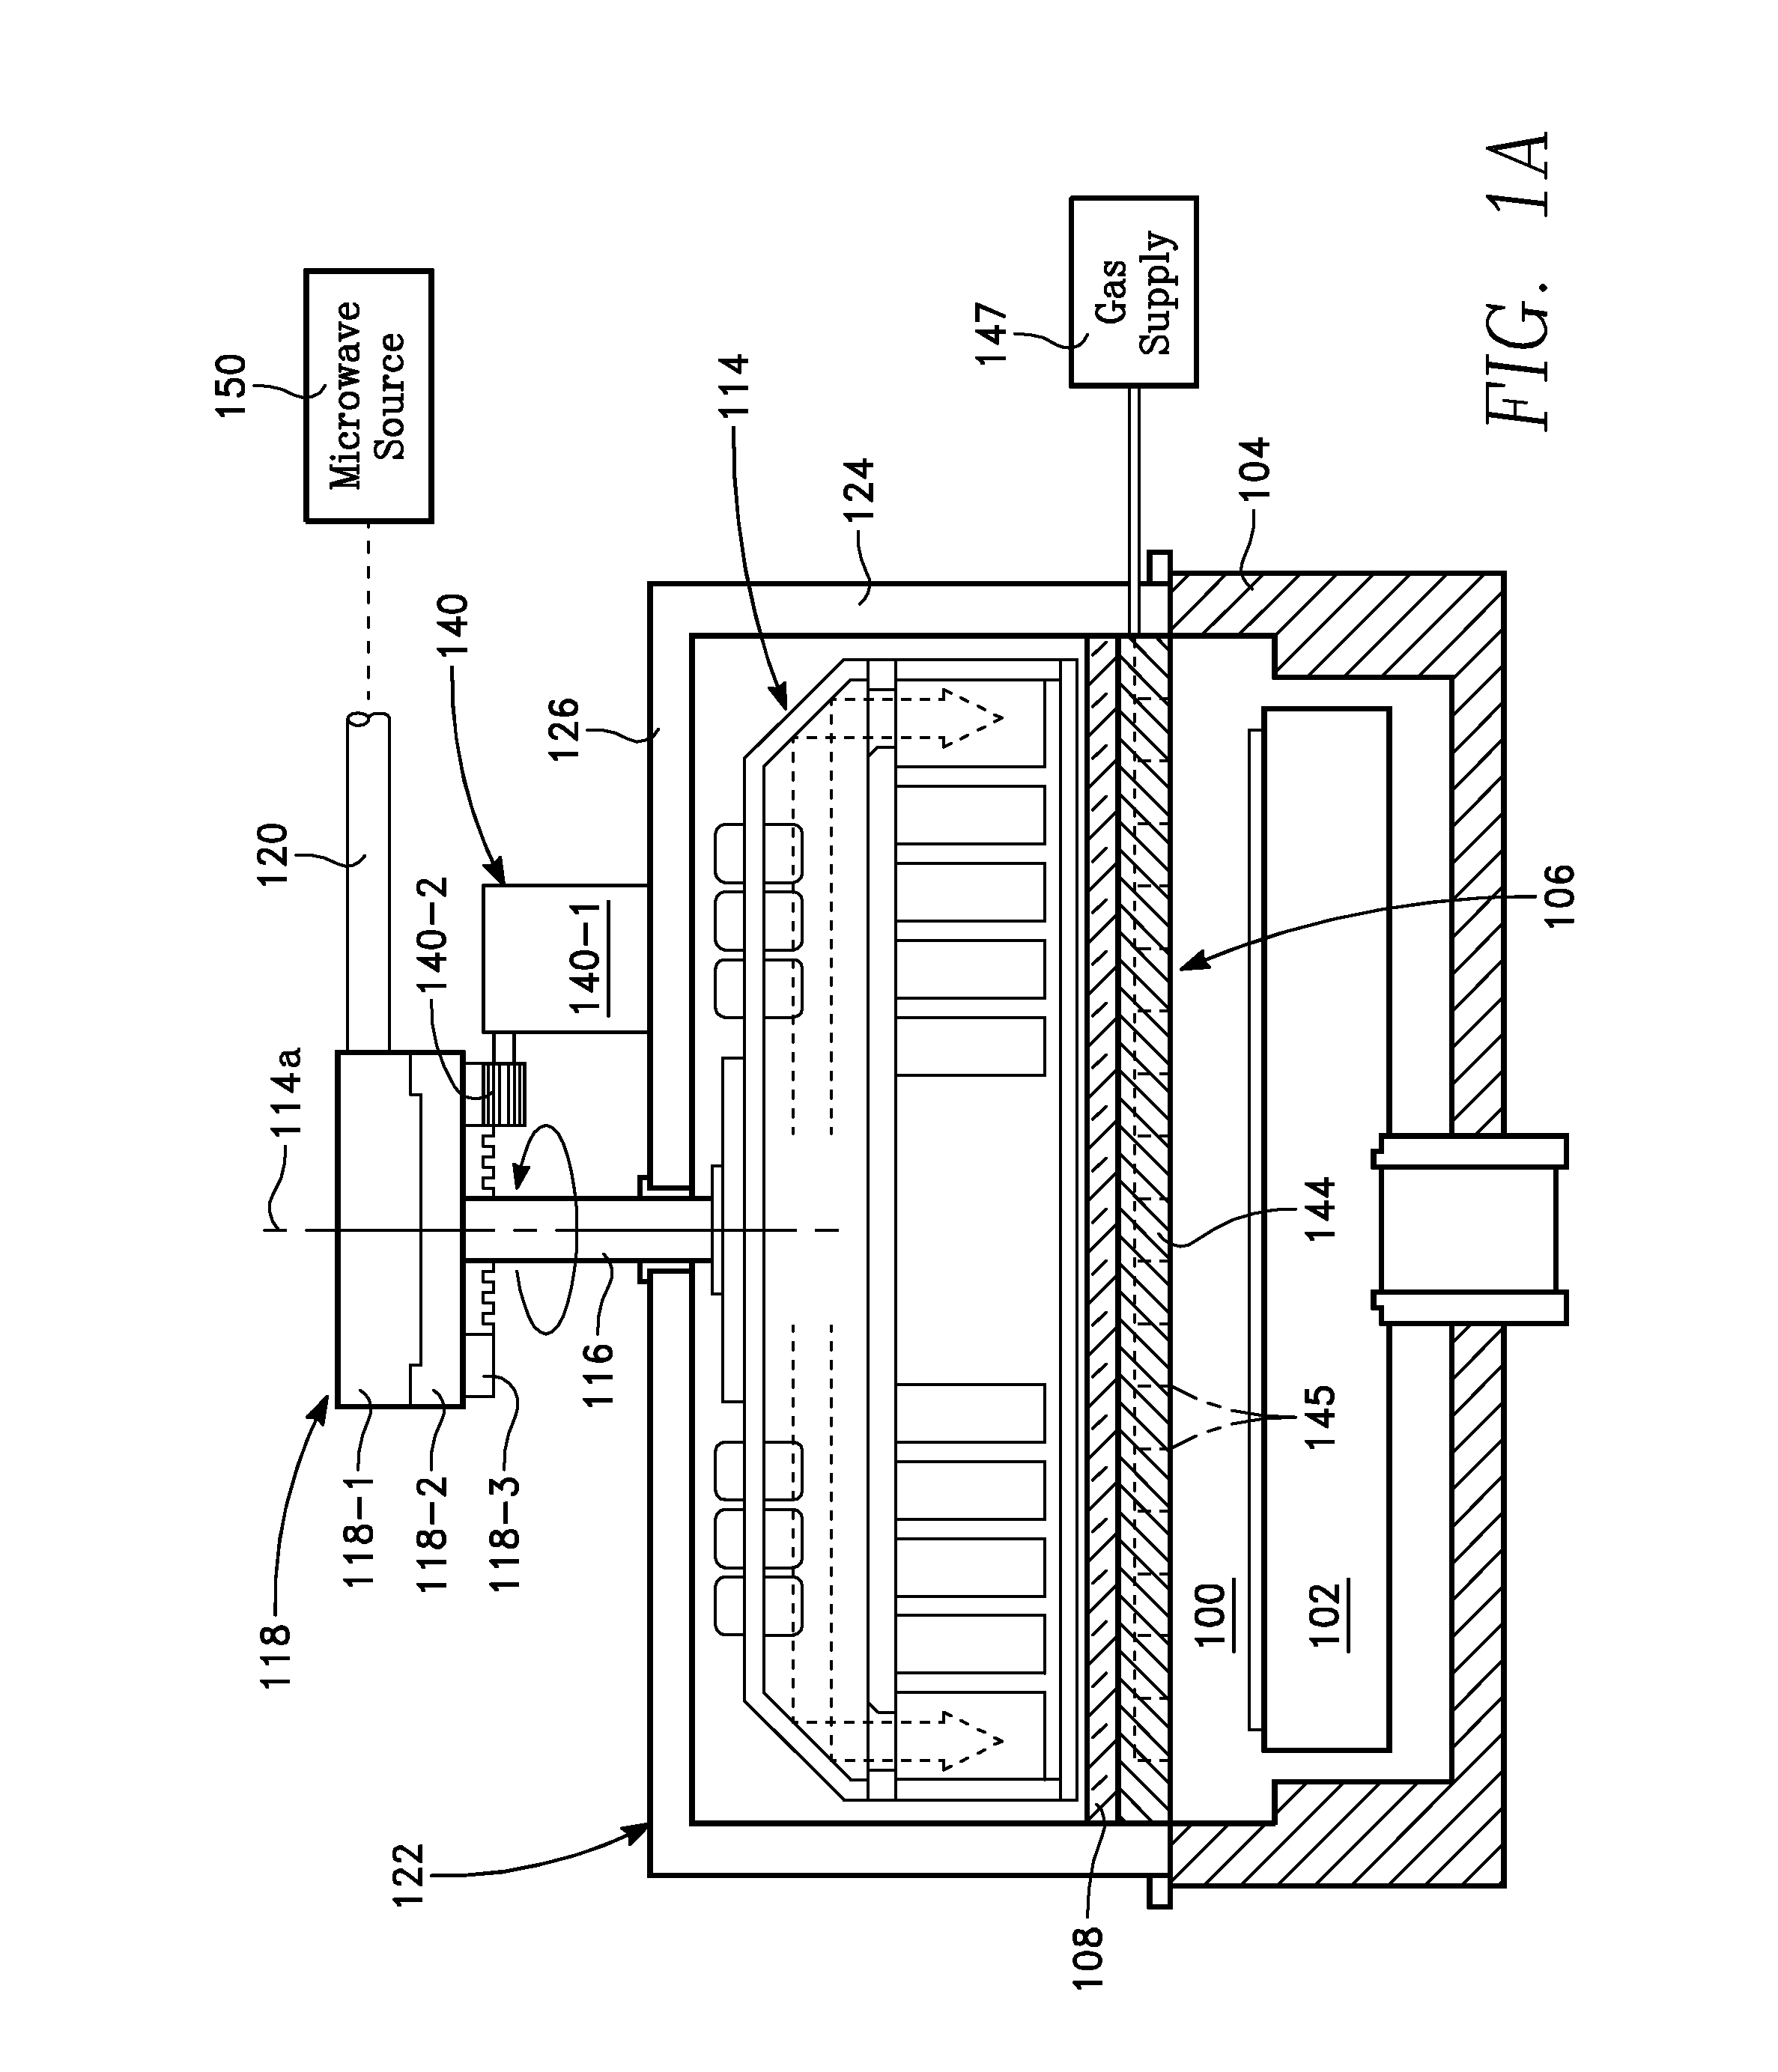 Workpiece processing chamber having a rotary microwave plasma antenna with slotted spiral waveguide